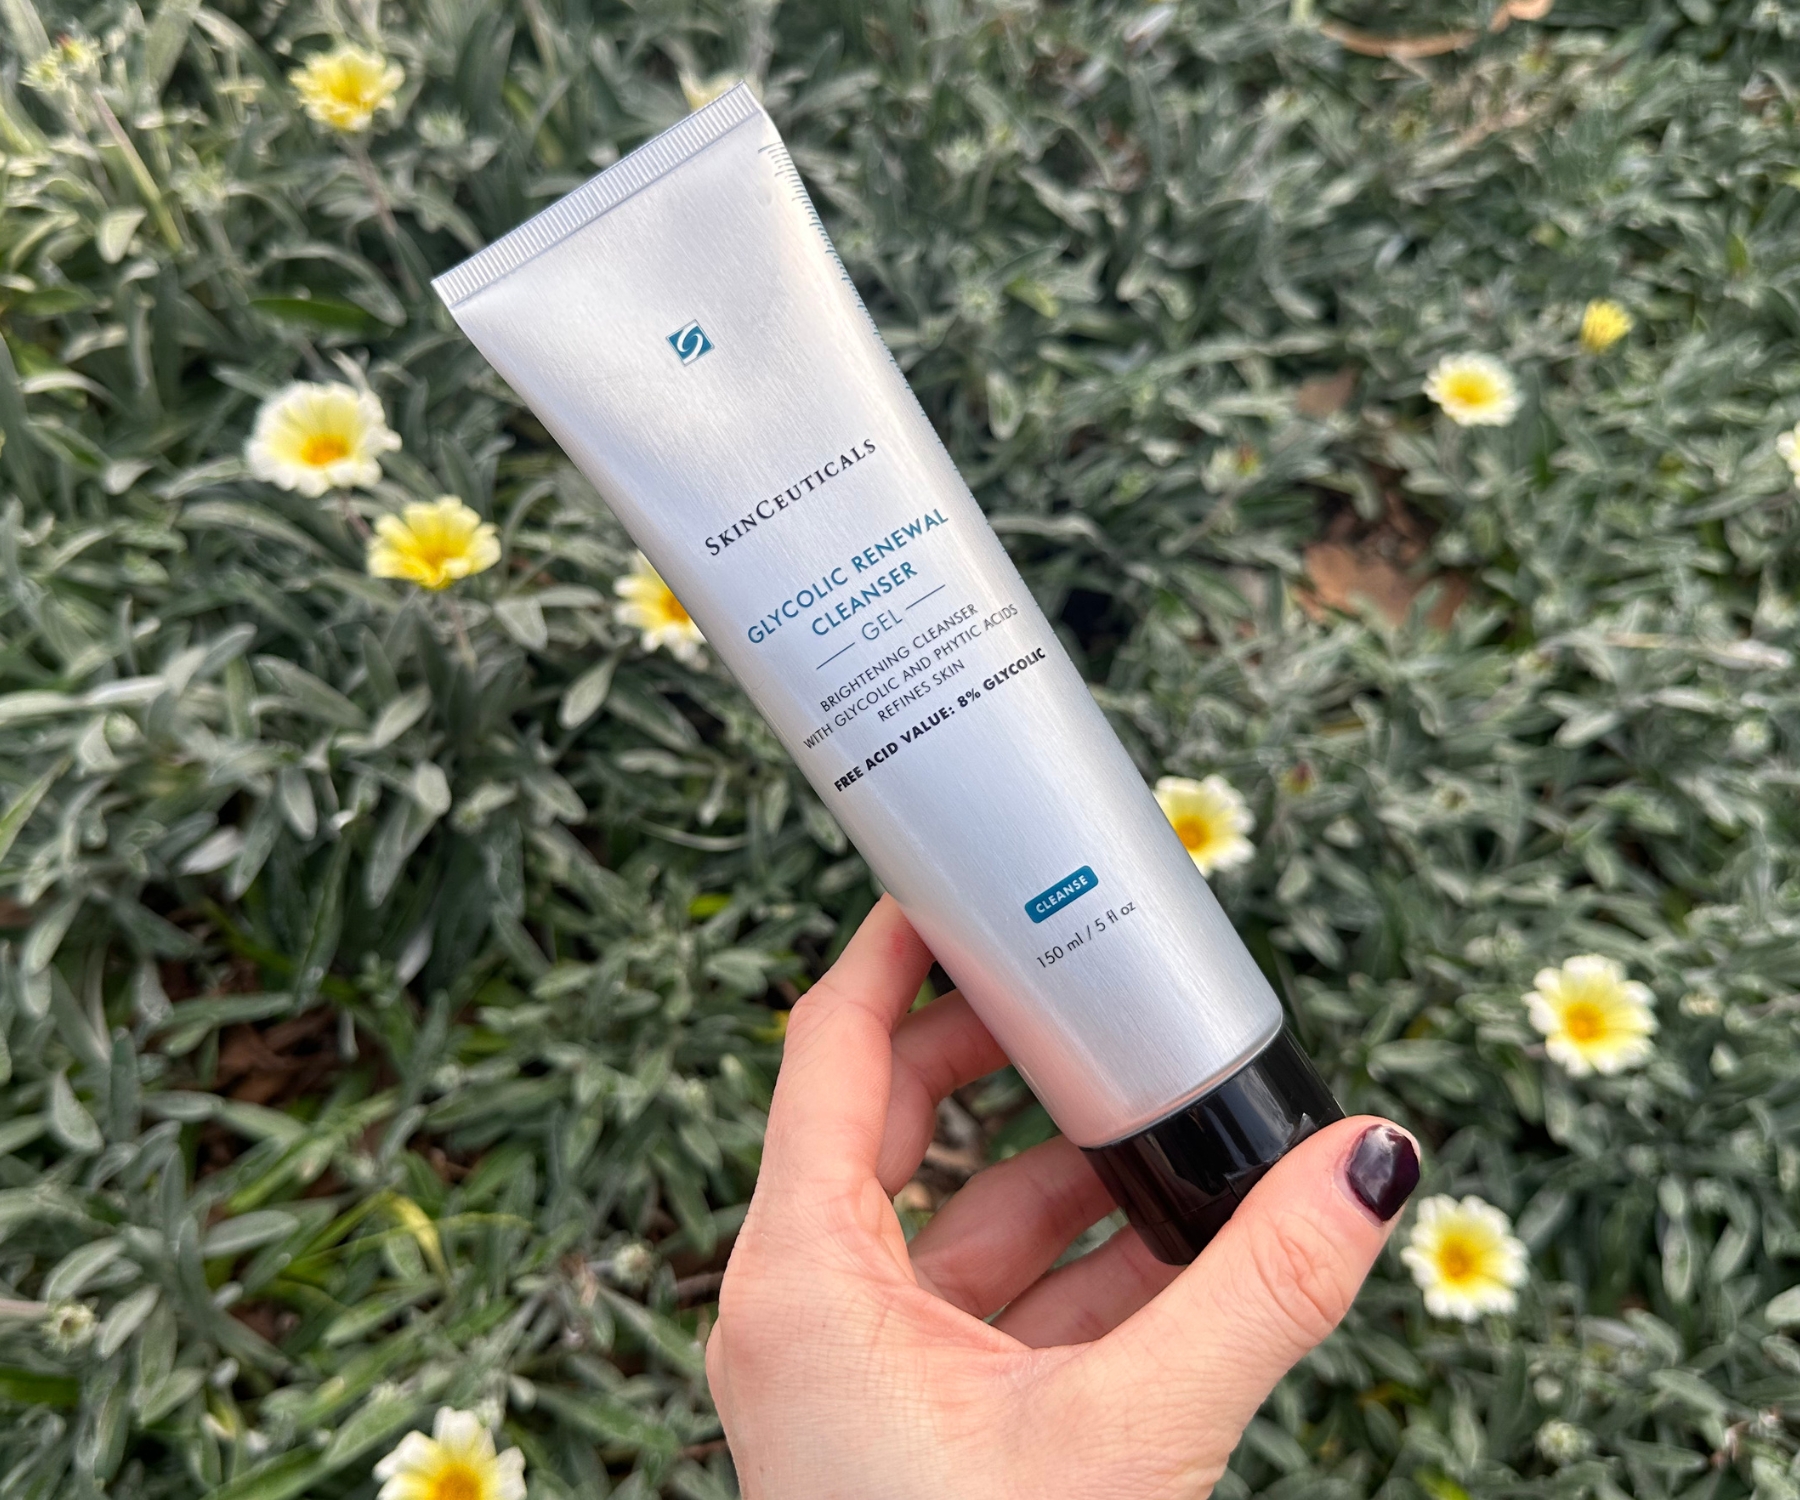 SkinCeuticals Glycolic Renewal Cleanser in-article